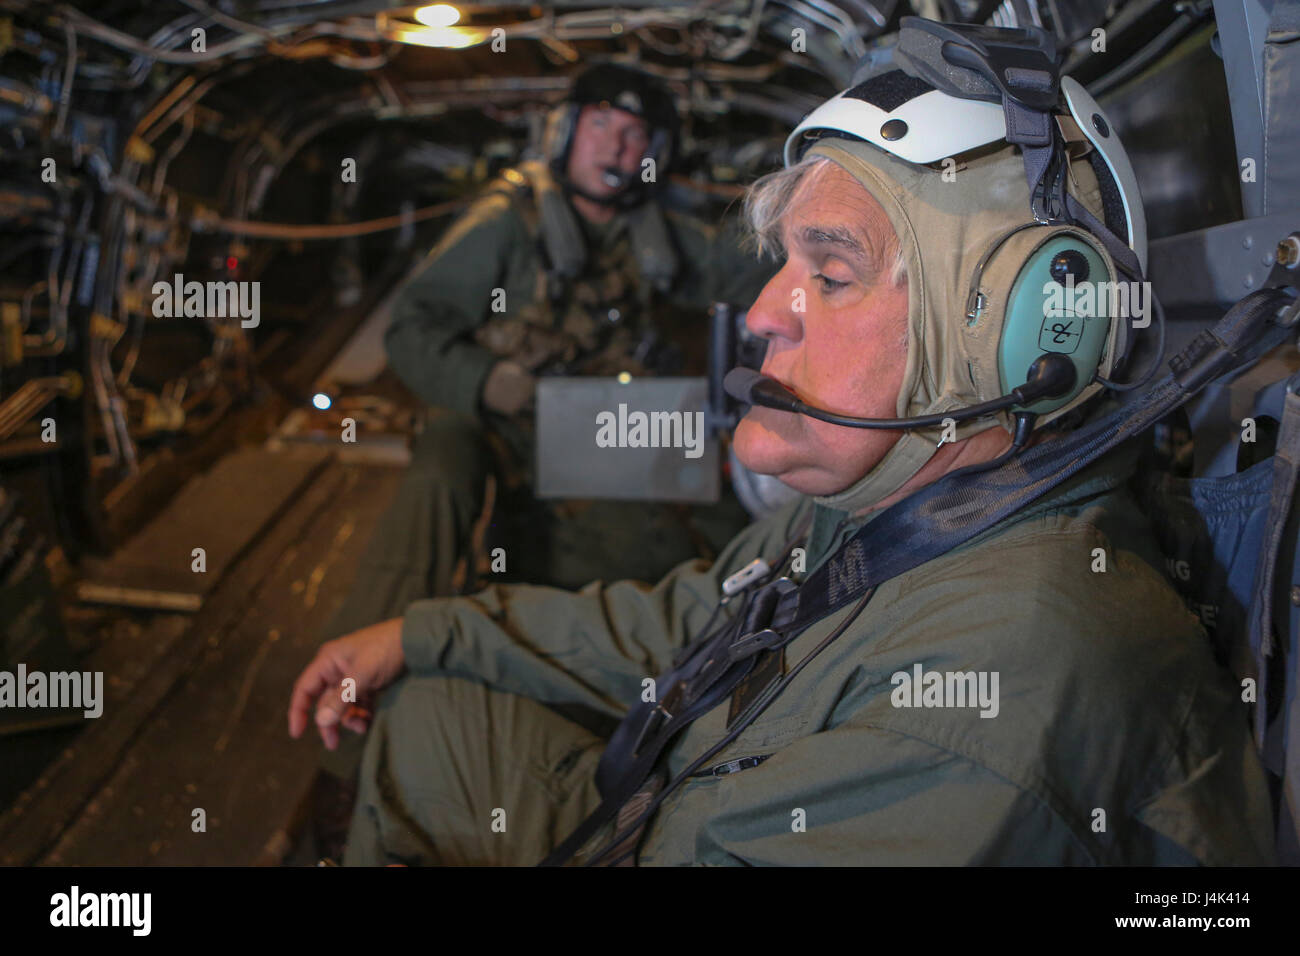 Jay Leno, television host for “Jay Leno’s Garage,” flies on an MV-22B Osprey during his visit to Marine Corps Air Station Camp Pendleton, Calif., March 3. Leno accompanied Marine Medium Tiltrotor Squadron 164 on an overall mission, including flight maneuvers and tailgunnery training. (U.S. Marine Corps photo by Lance Cpl. Jake M. T. McClung) Stock Photo